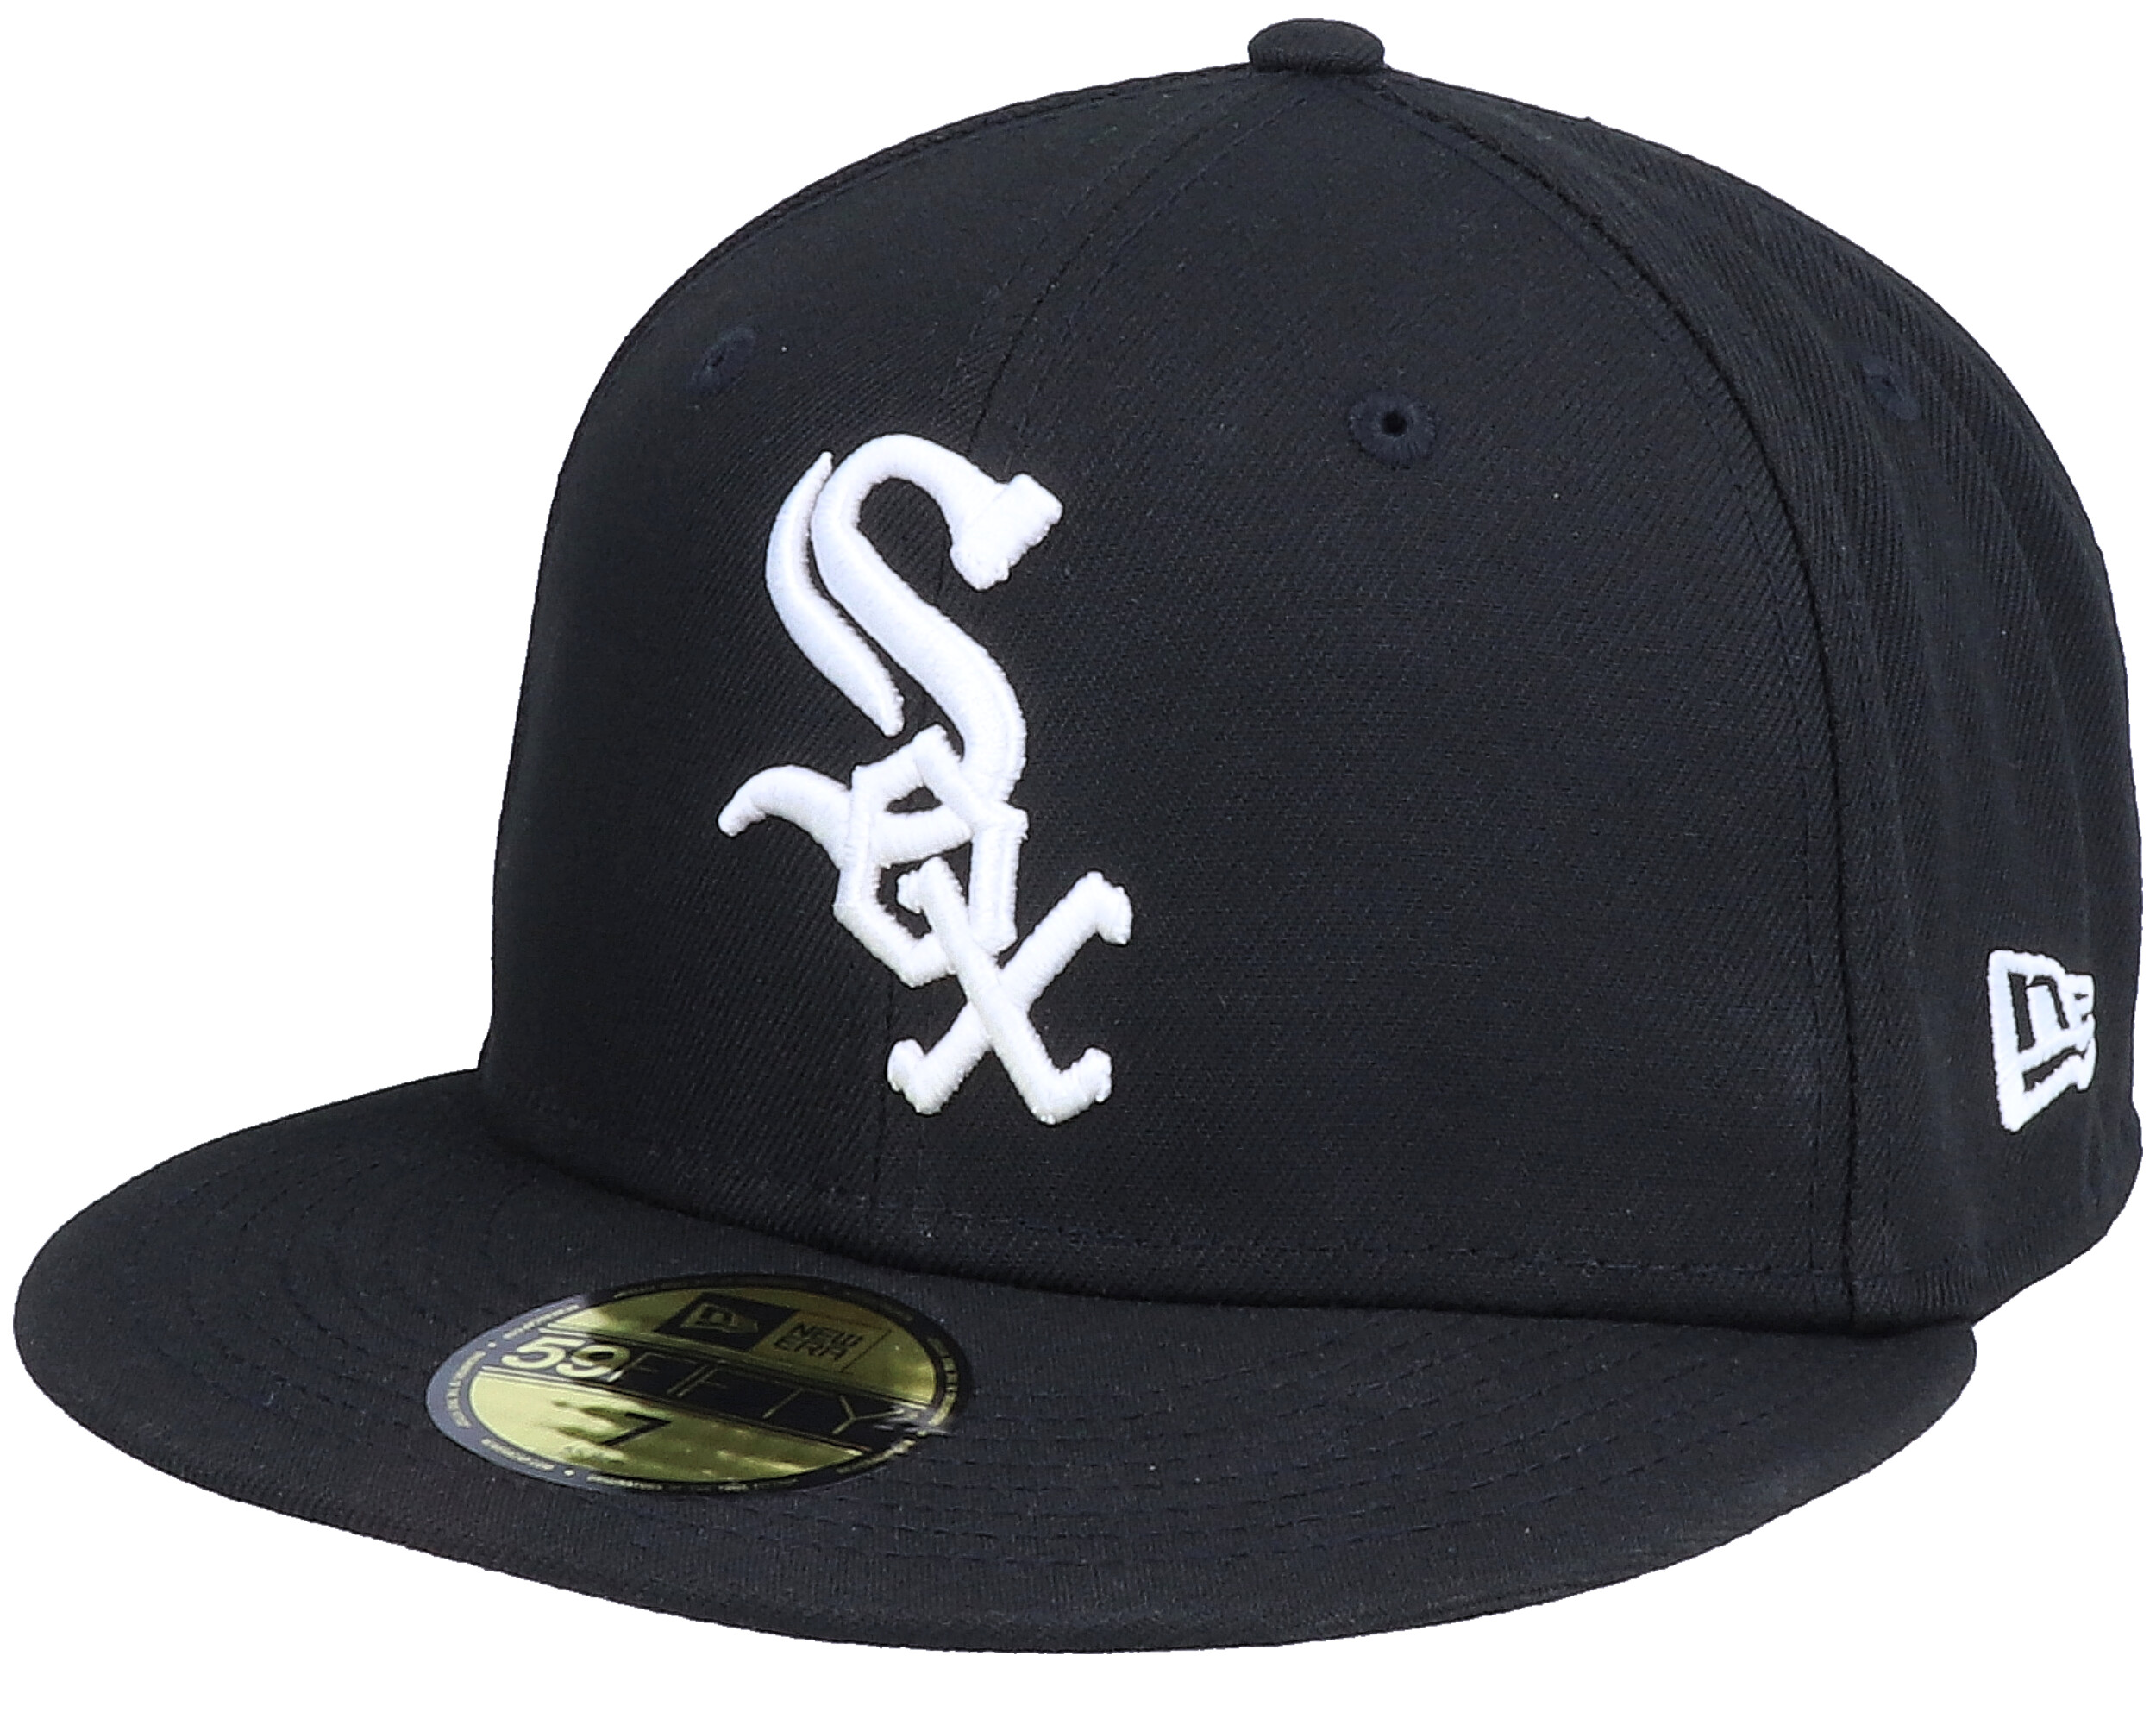 Chicago White Sox Authentic On-Field 59Fifty Black Fitted - New Era cap ...